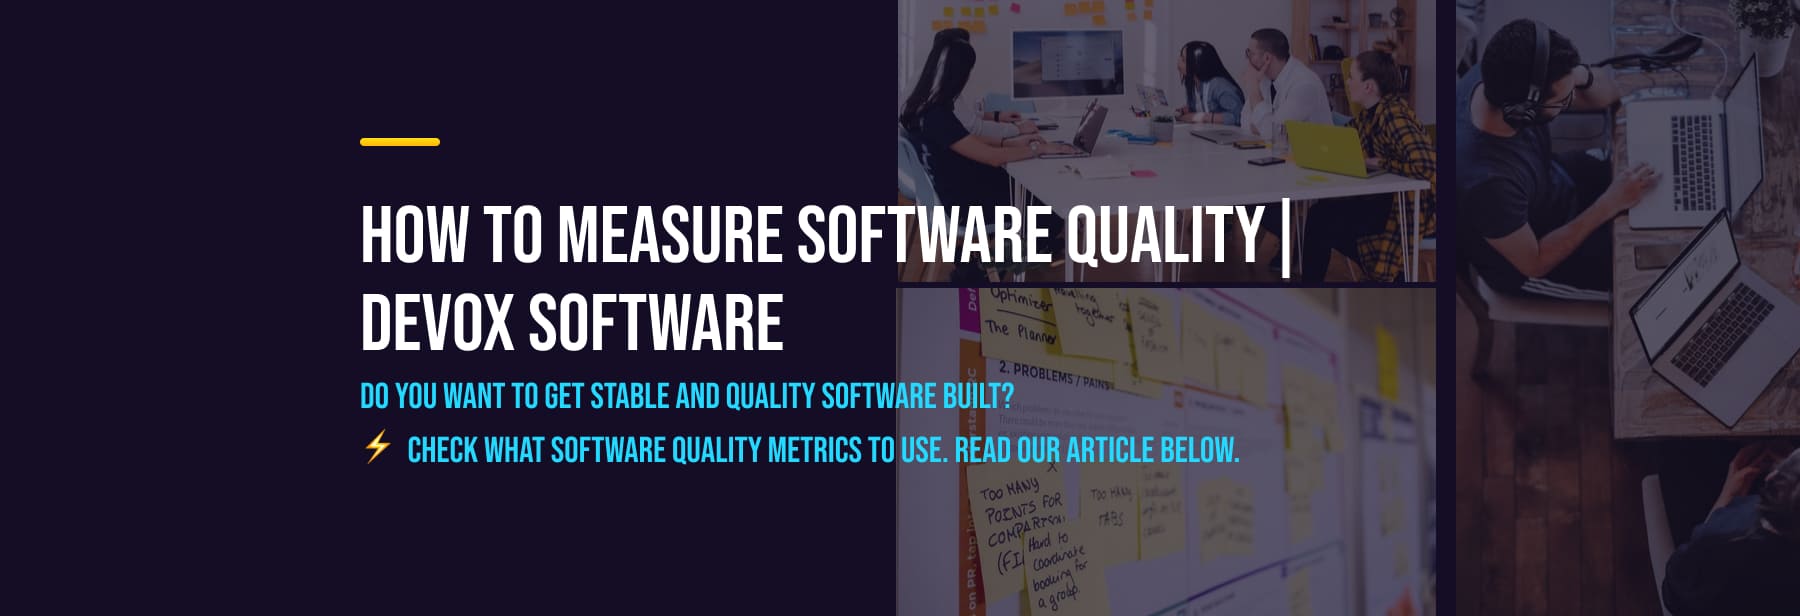 How to Measure Software Quality